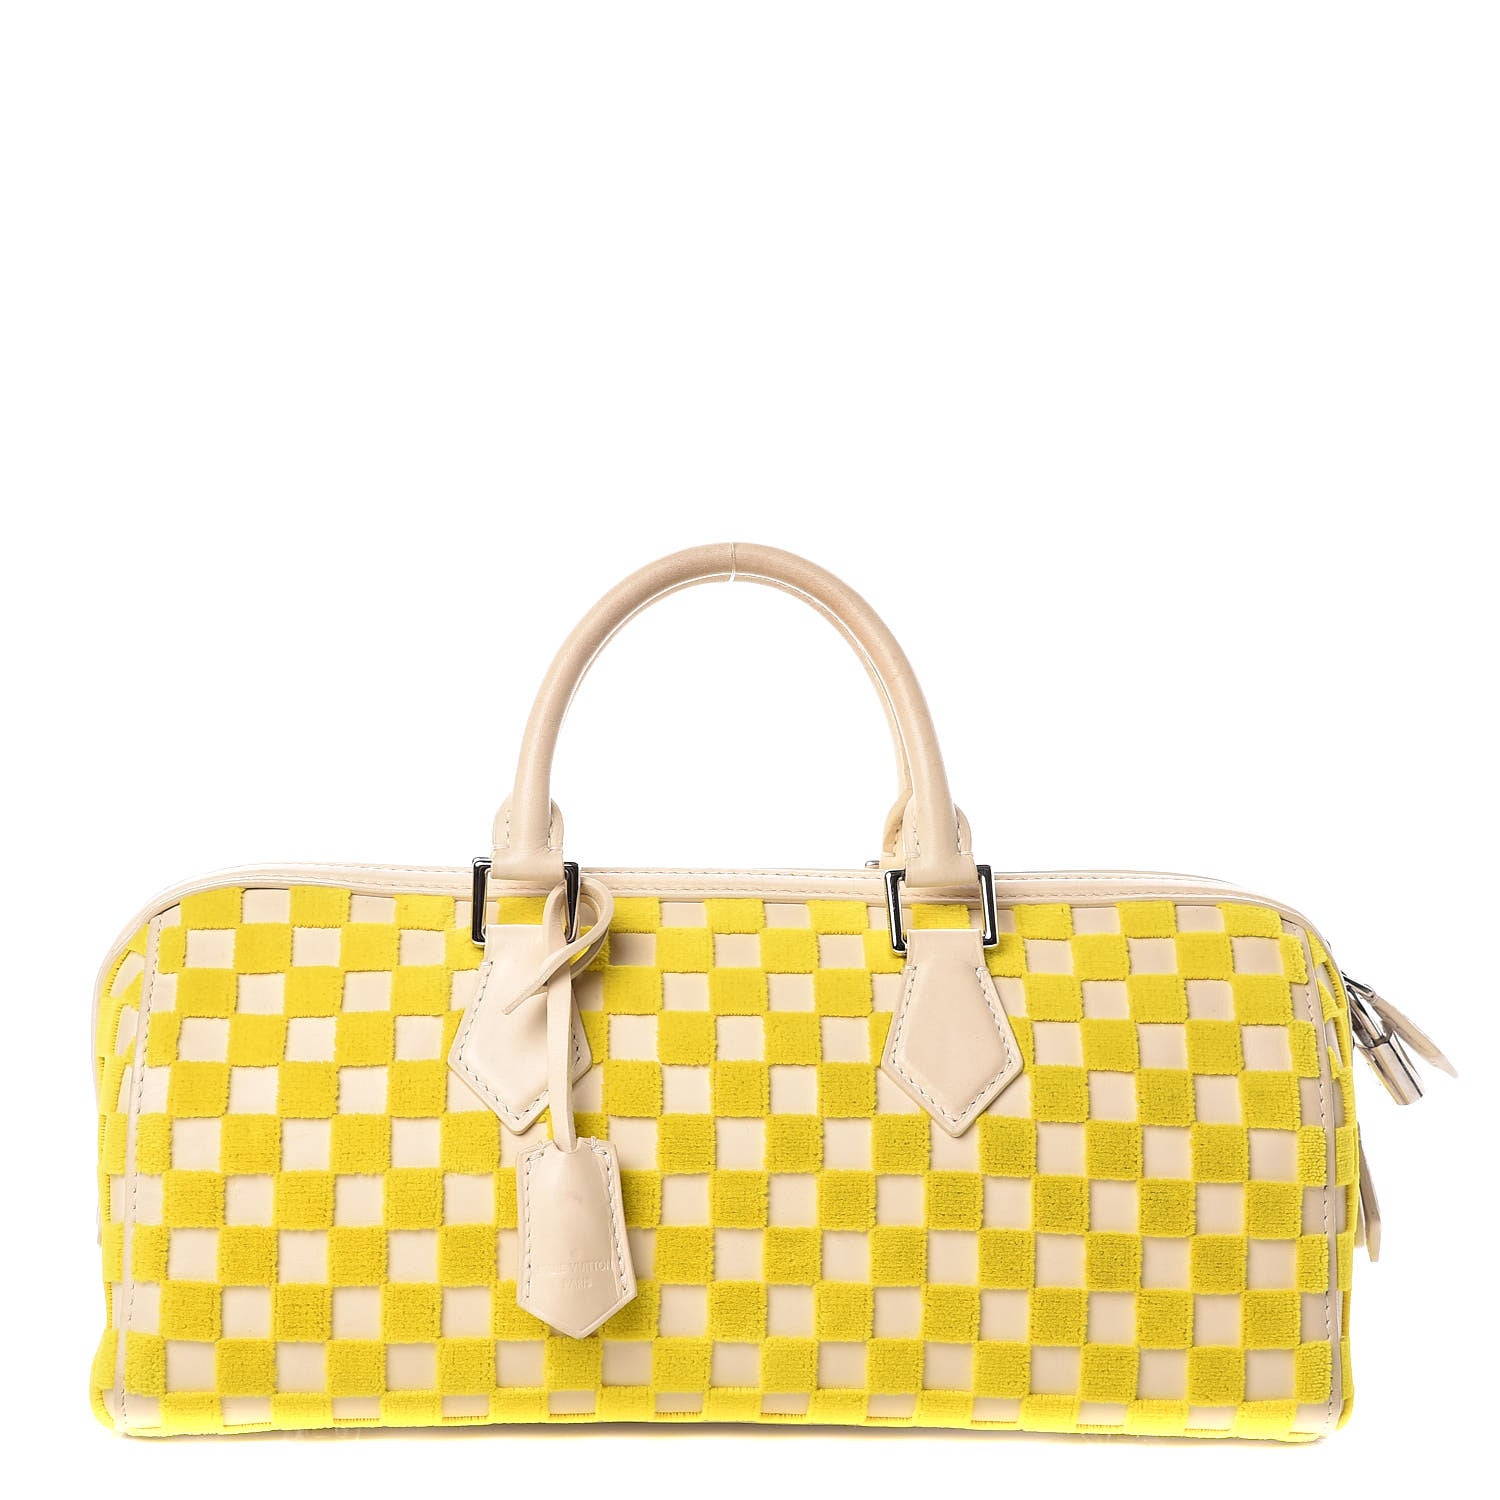 Louis Vuitton Malesherbes Yellow Leather Handbag (Pre-Owned)